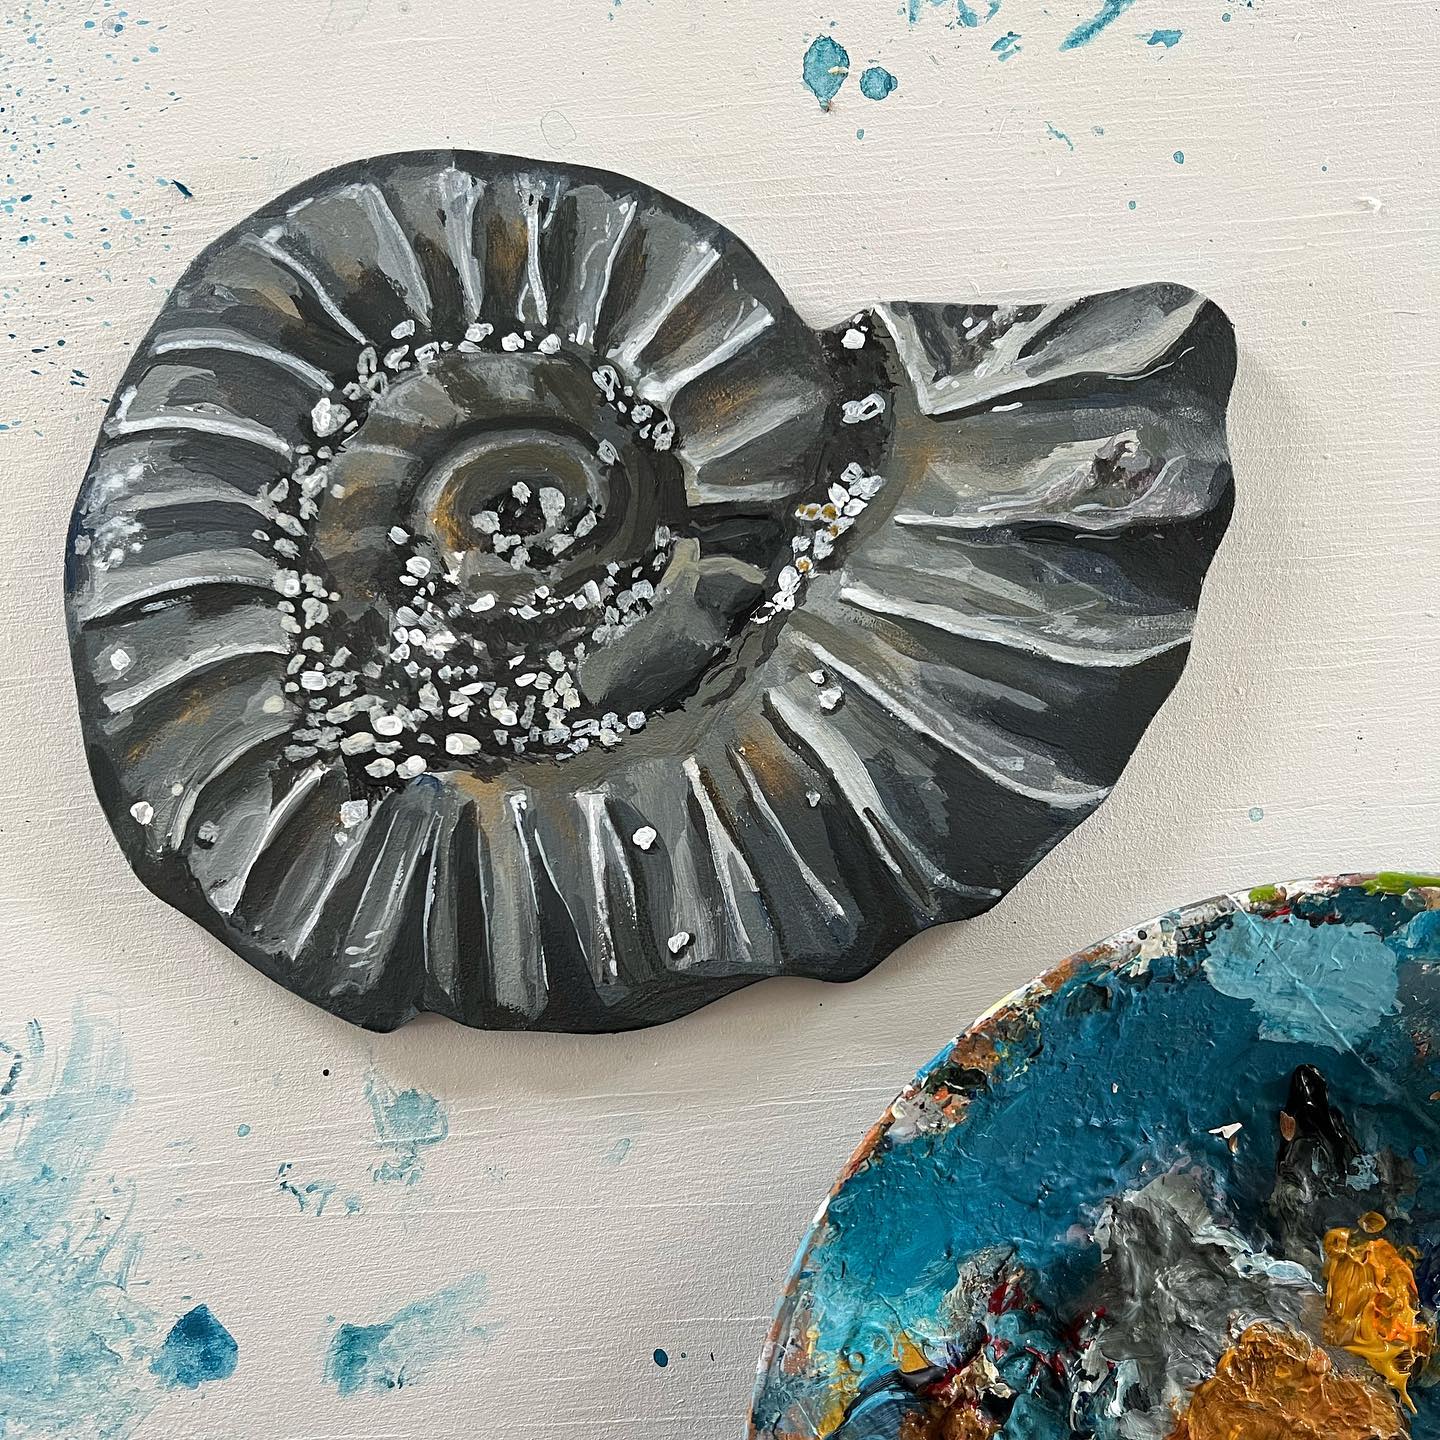 Ammonites, fossils and pyrite from Jurassic coast in England, Dorset and Devon, Lyme Regis, Charmouth beach. www.Fenne.be